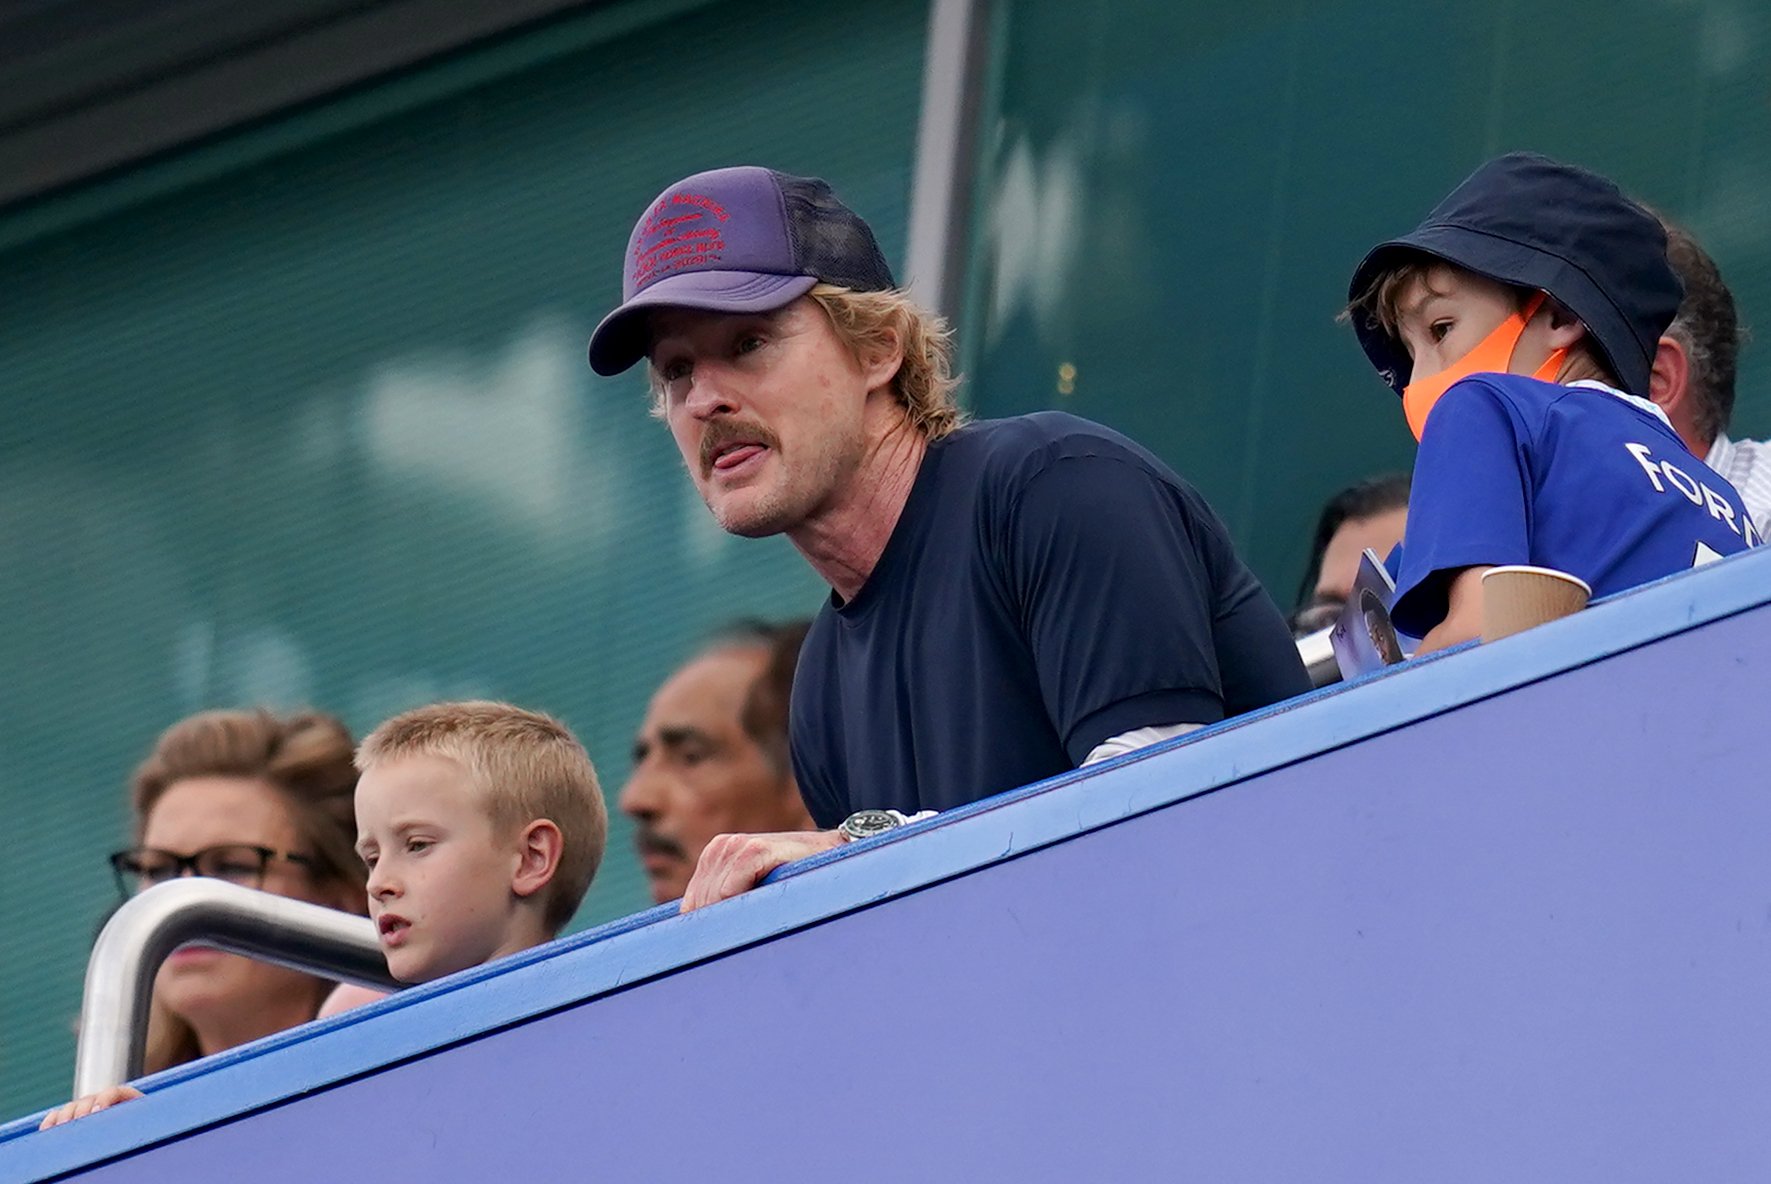 Actor Owen Wilson pictured watching play from the stands during the Premier League match at Stamford Bridge on August 14, 2022 in London | Source: Getty Images